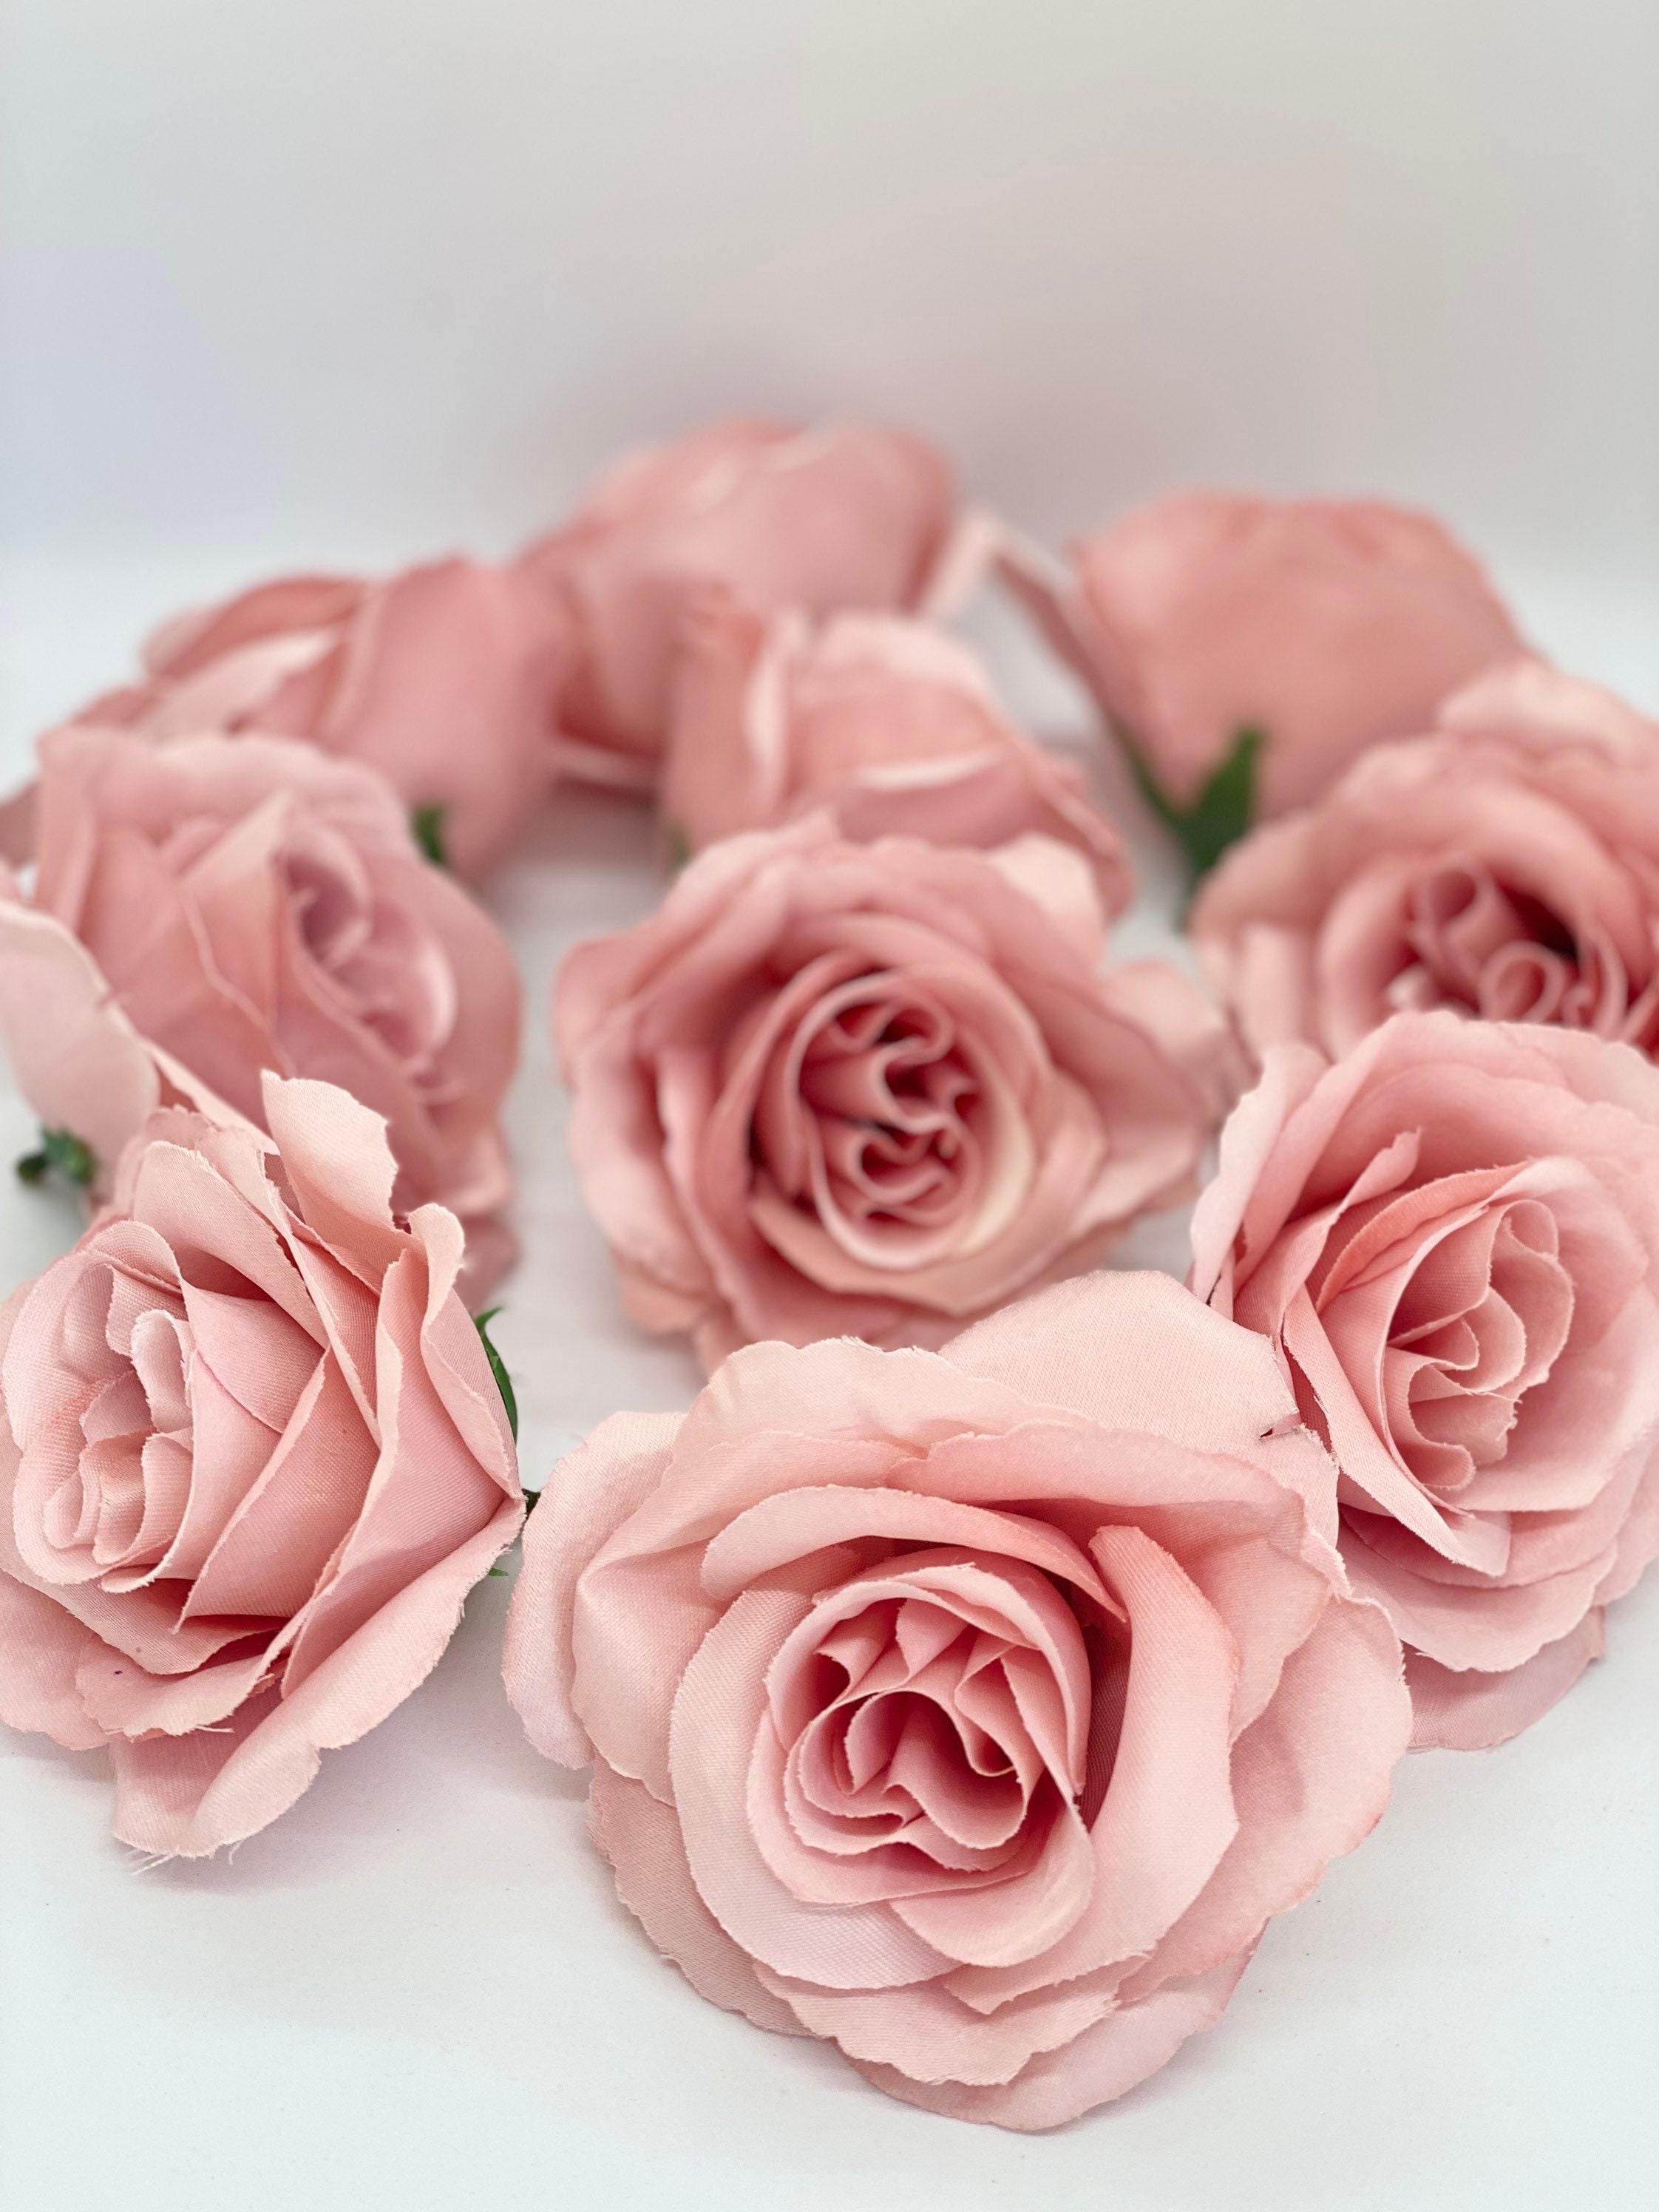 Buy 3.5 Artificial Dusty Pink Rose Dusty Rose Flower Dusty Rose Silk Flower  Dusty Pink Wedding Dusty Rose Wedding Flower Decor Dusty Rose Decor Online  in India 